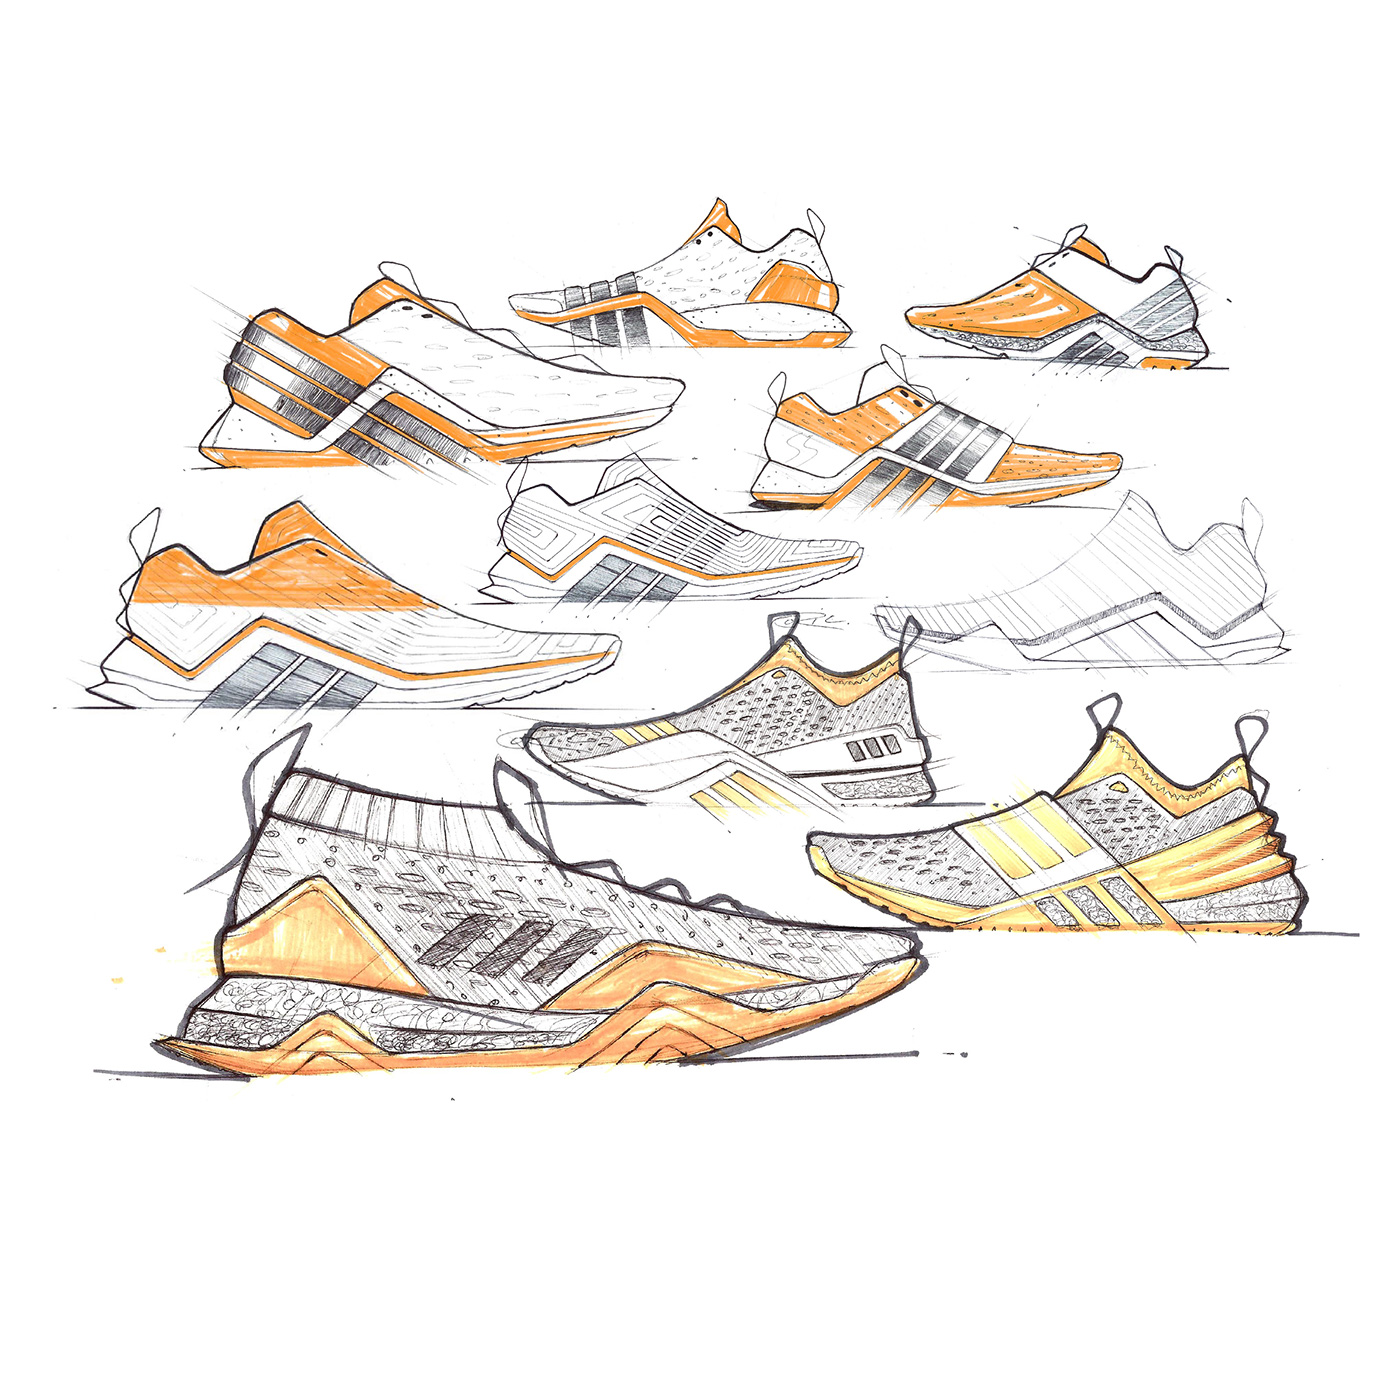 sketch sketchbook photoshop pen pencil Nike adidas New Balance shoes sneakers